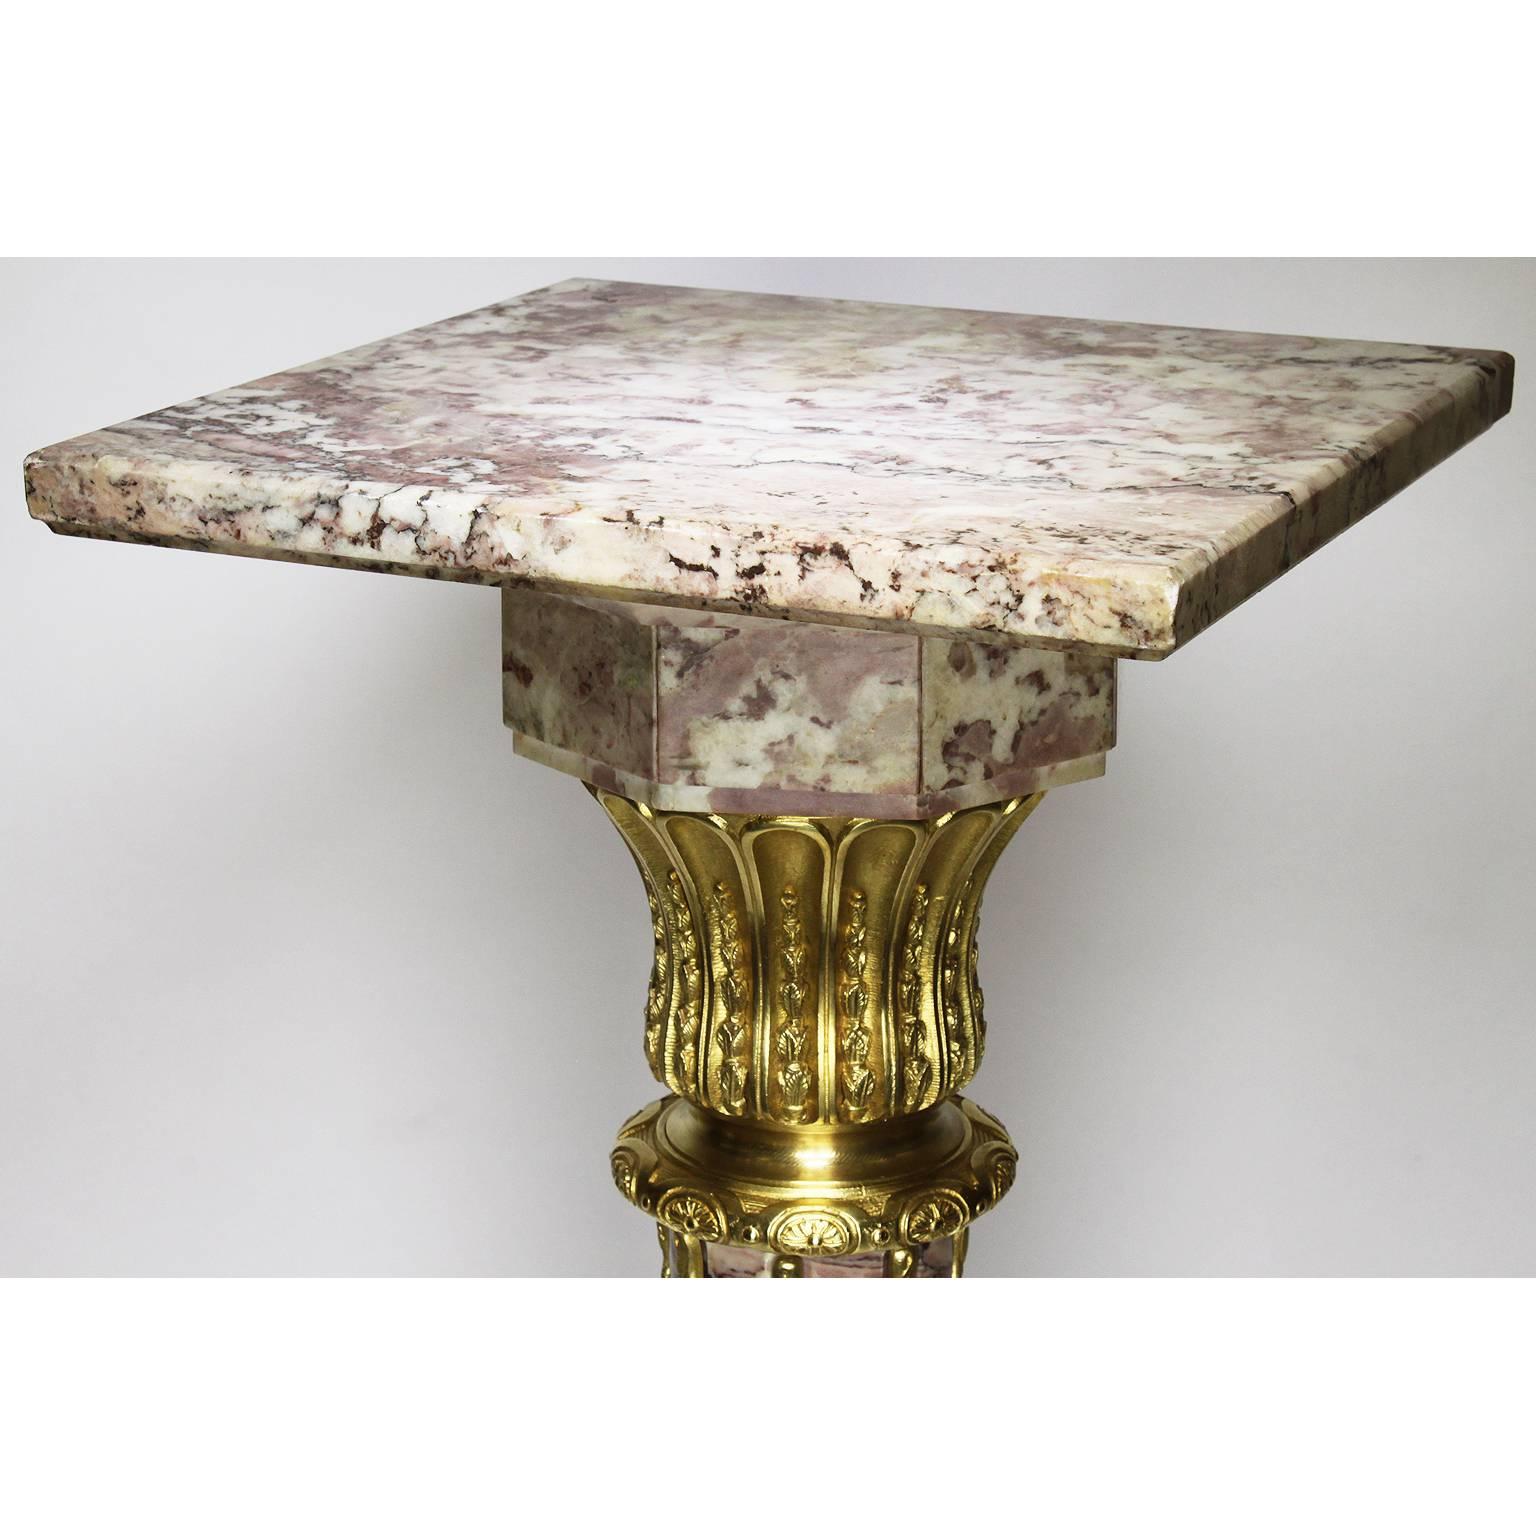 A fine and tall French 19th century Louis XVI style Brêche Violette marble and gilt bronze-mounted pedestal stand. The slender fluted and tapered marble body surmounted with a scalloped peacock and rosette shaped supports with gilt bronze floral